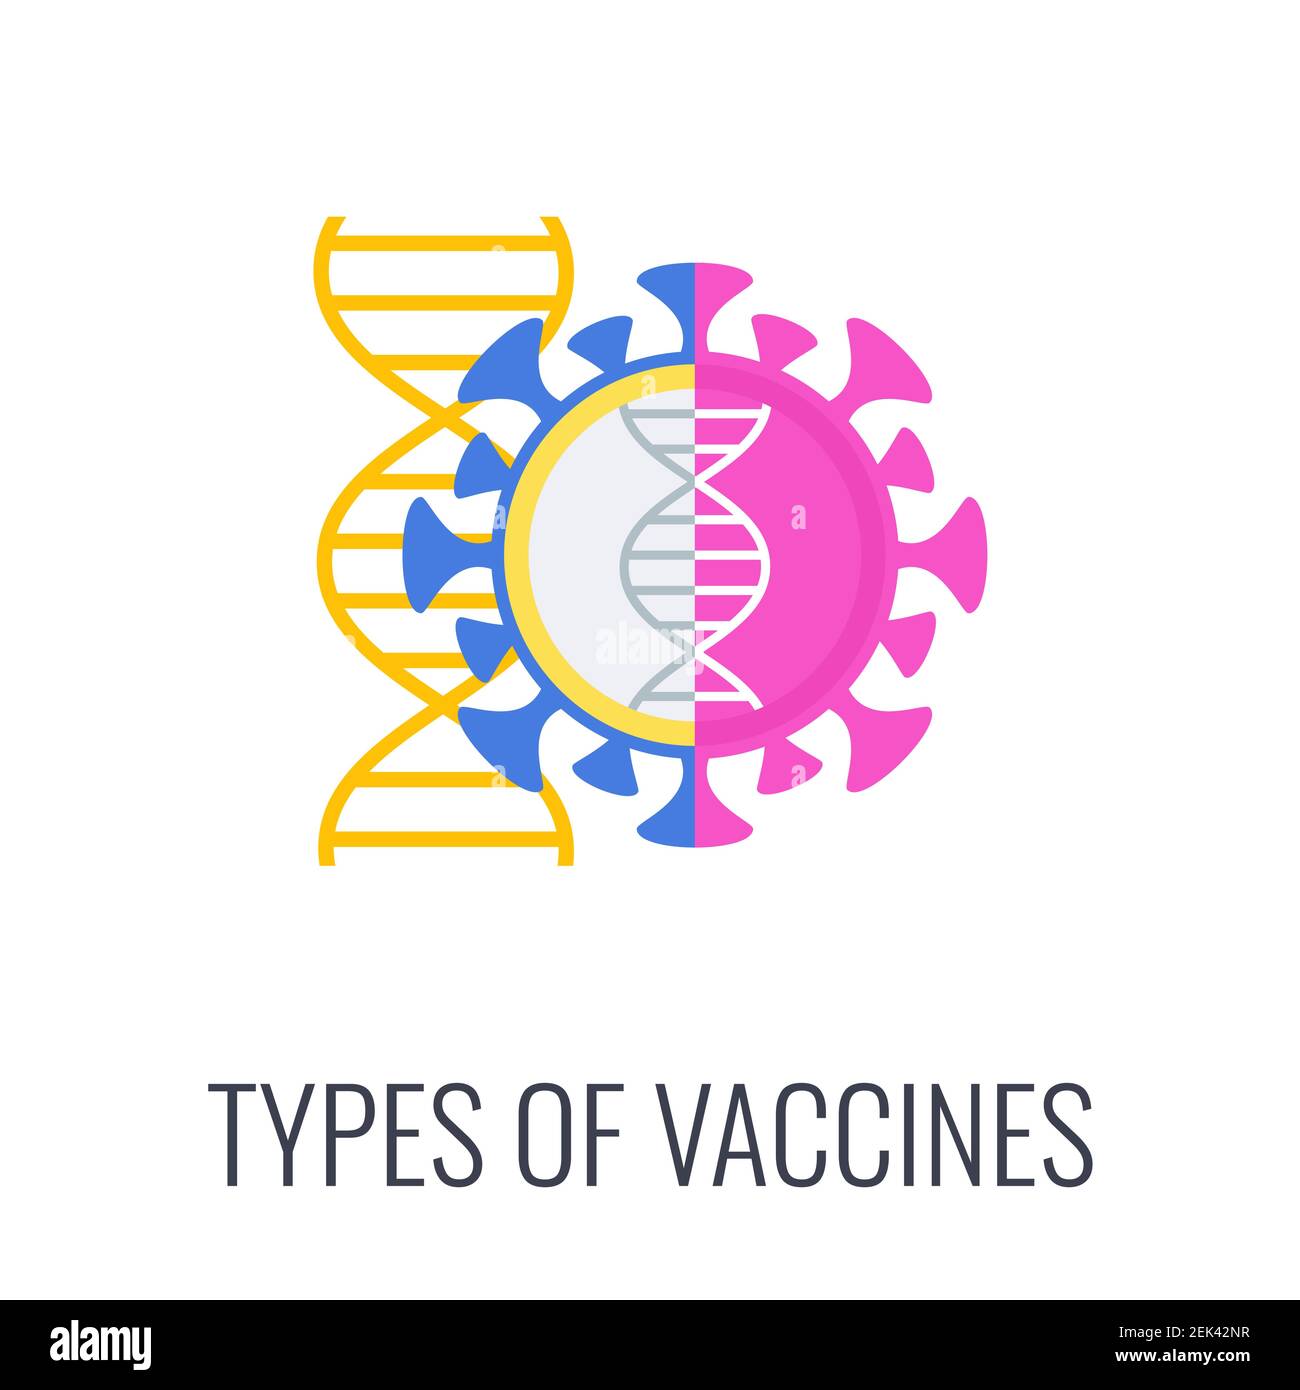 Different types of COVID 19 vaccines icon. Protect people Stock Vector